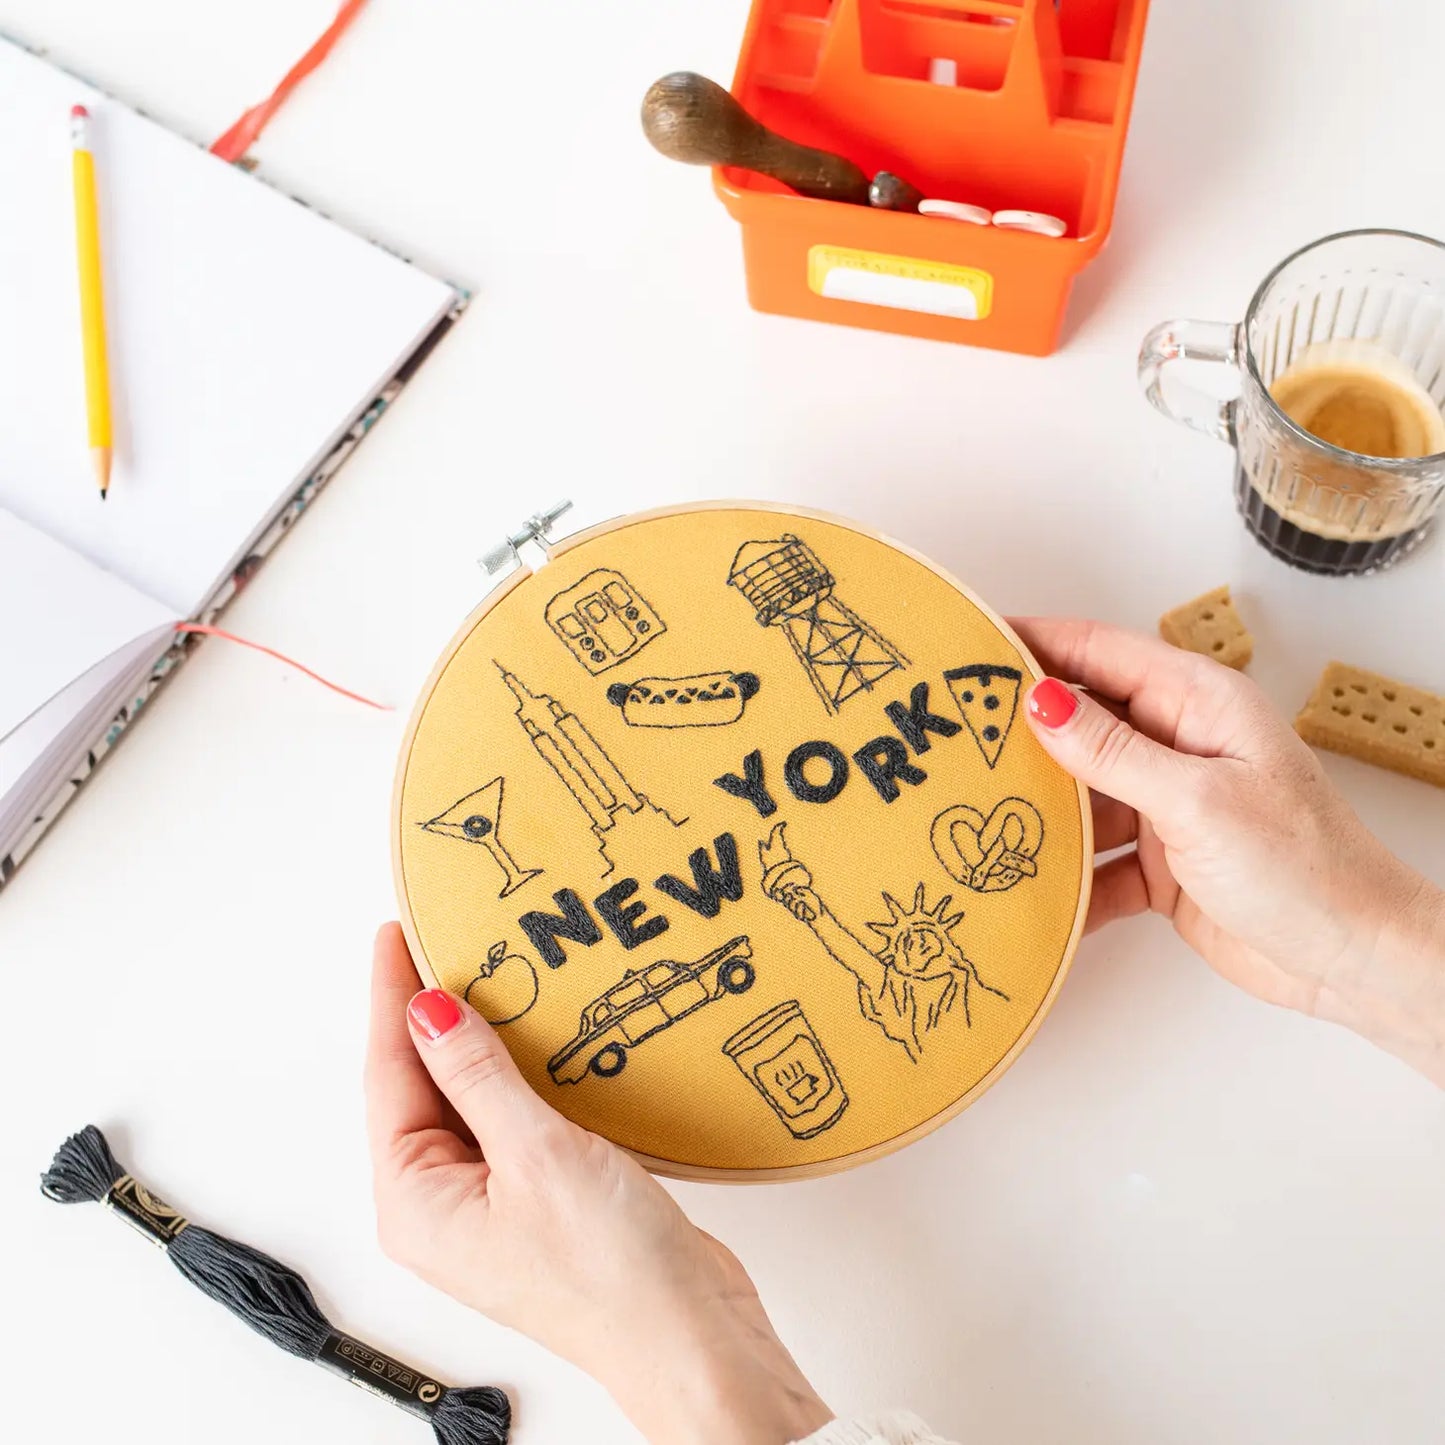 New York Icons Embroidery Kit